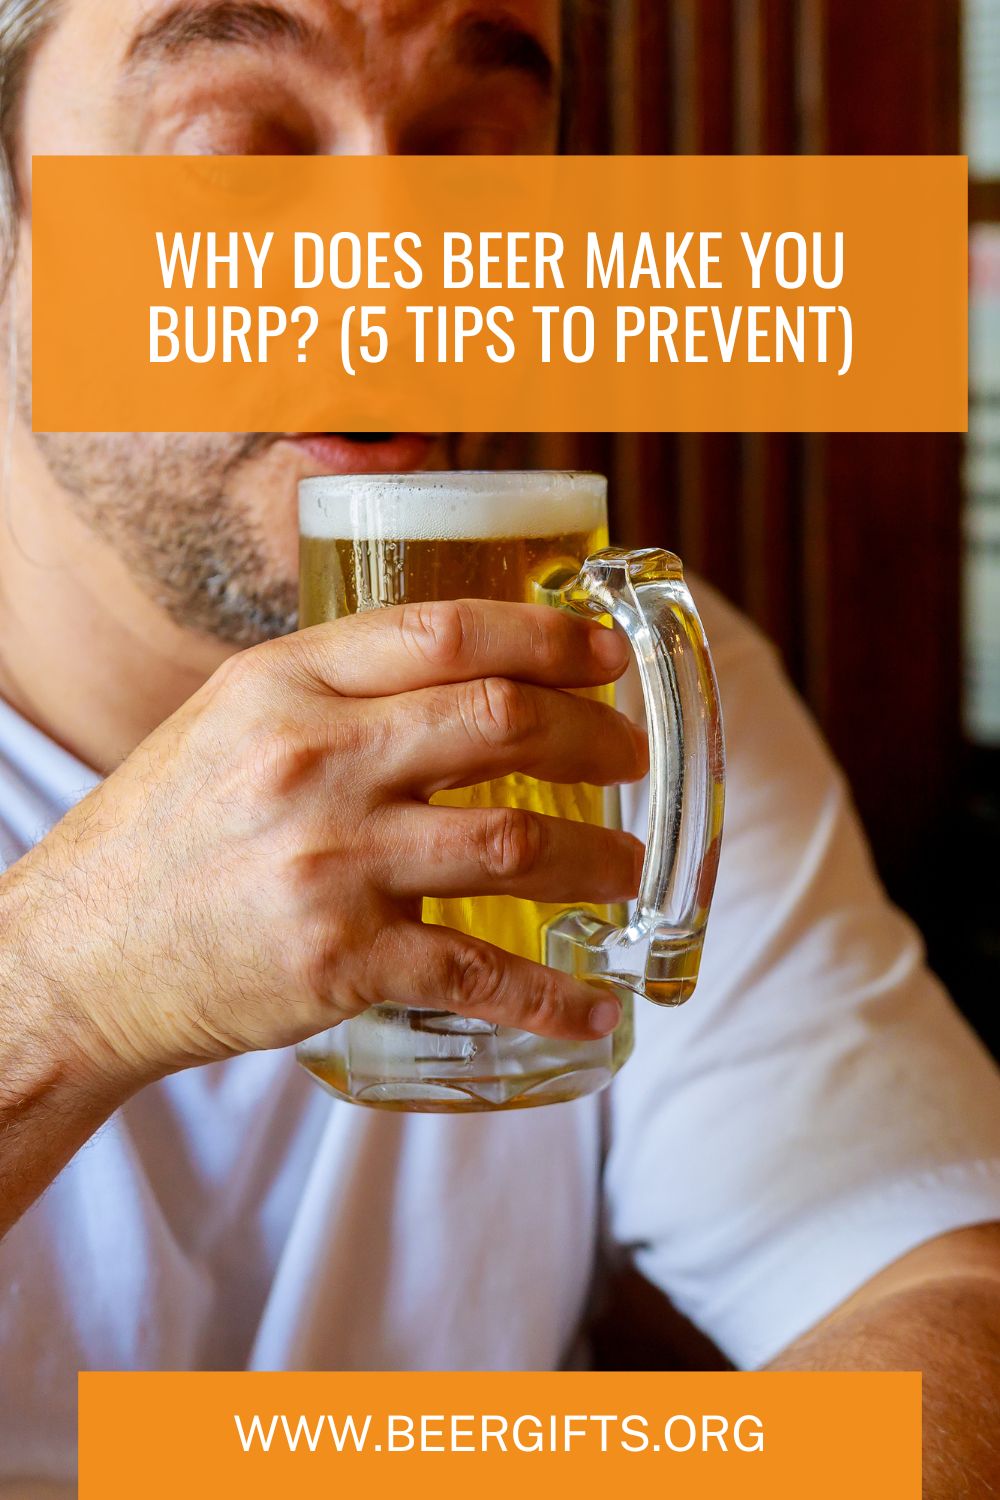 Why Does Beer Make You Burp? (5 Tips To Prevent)2